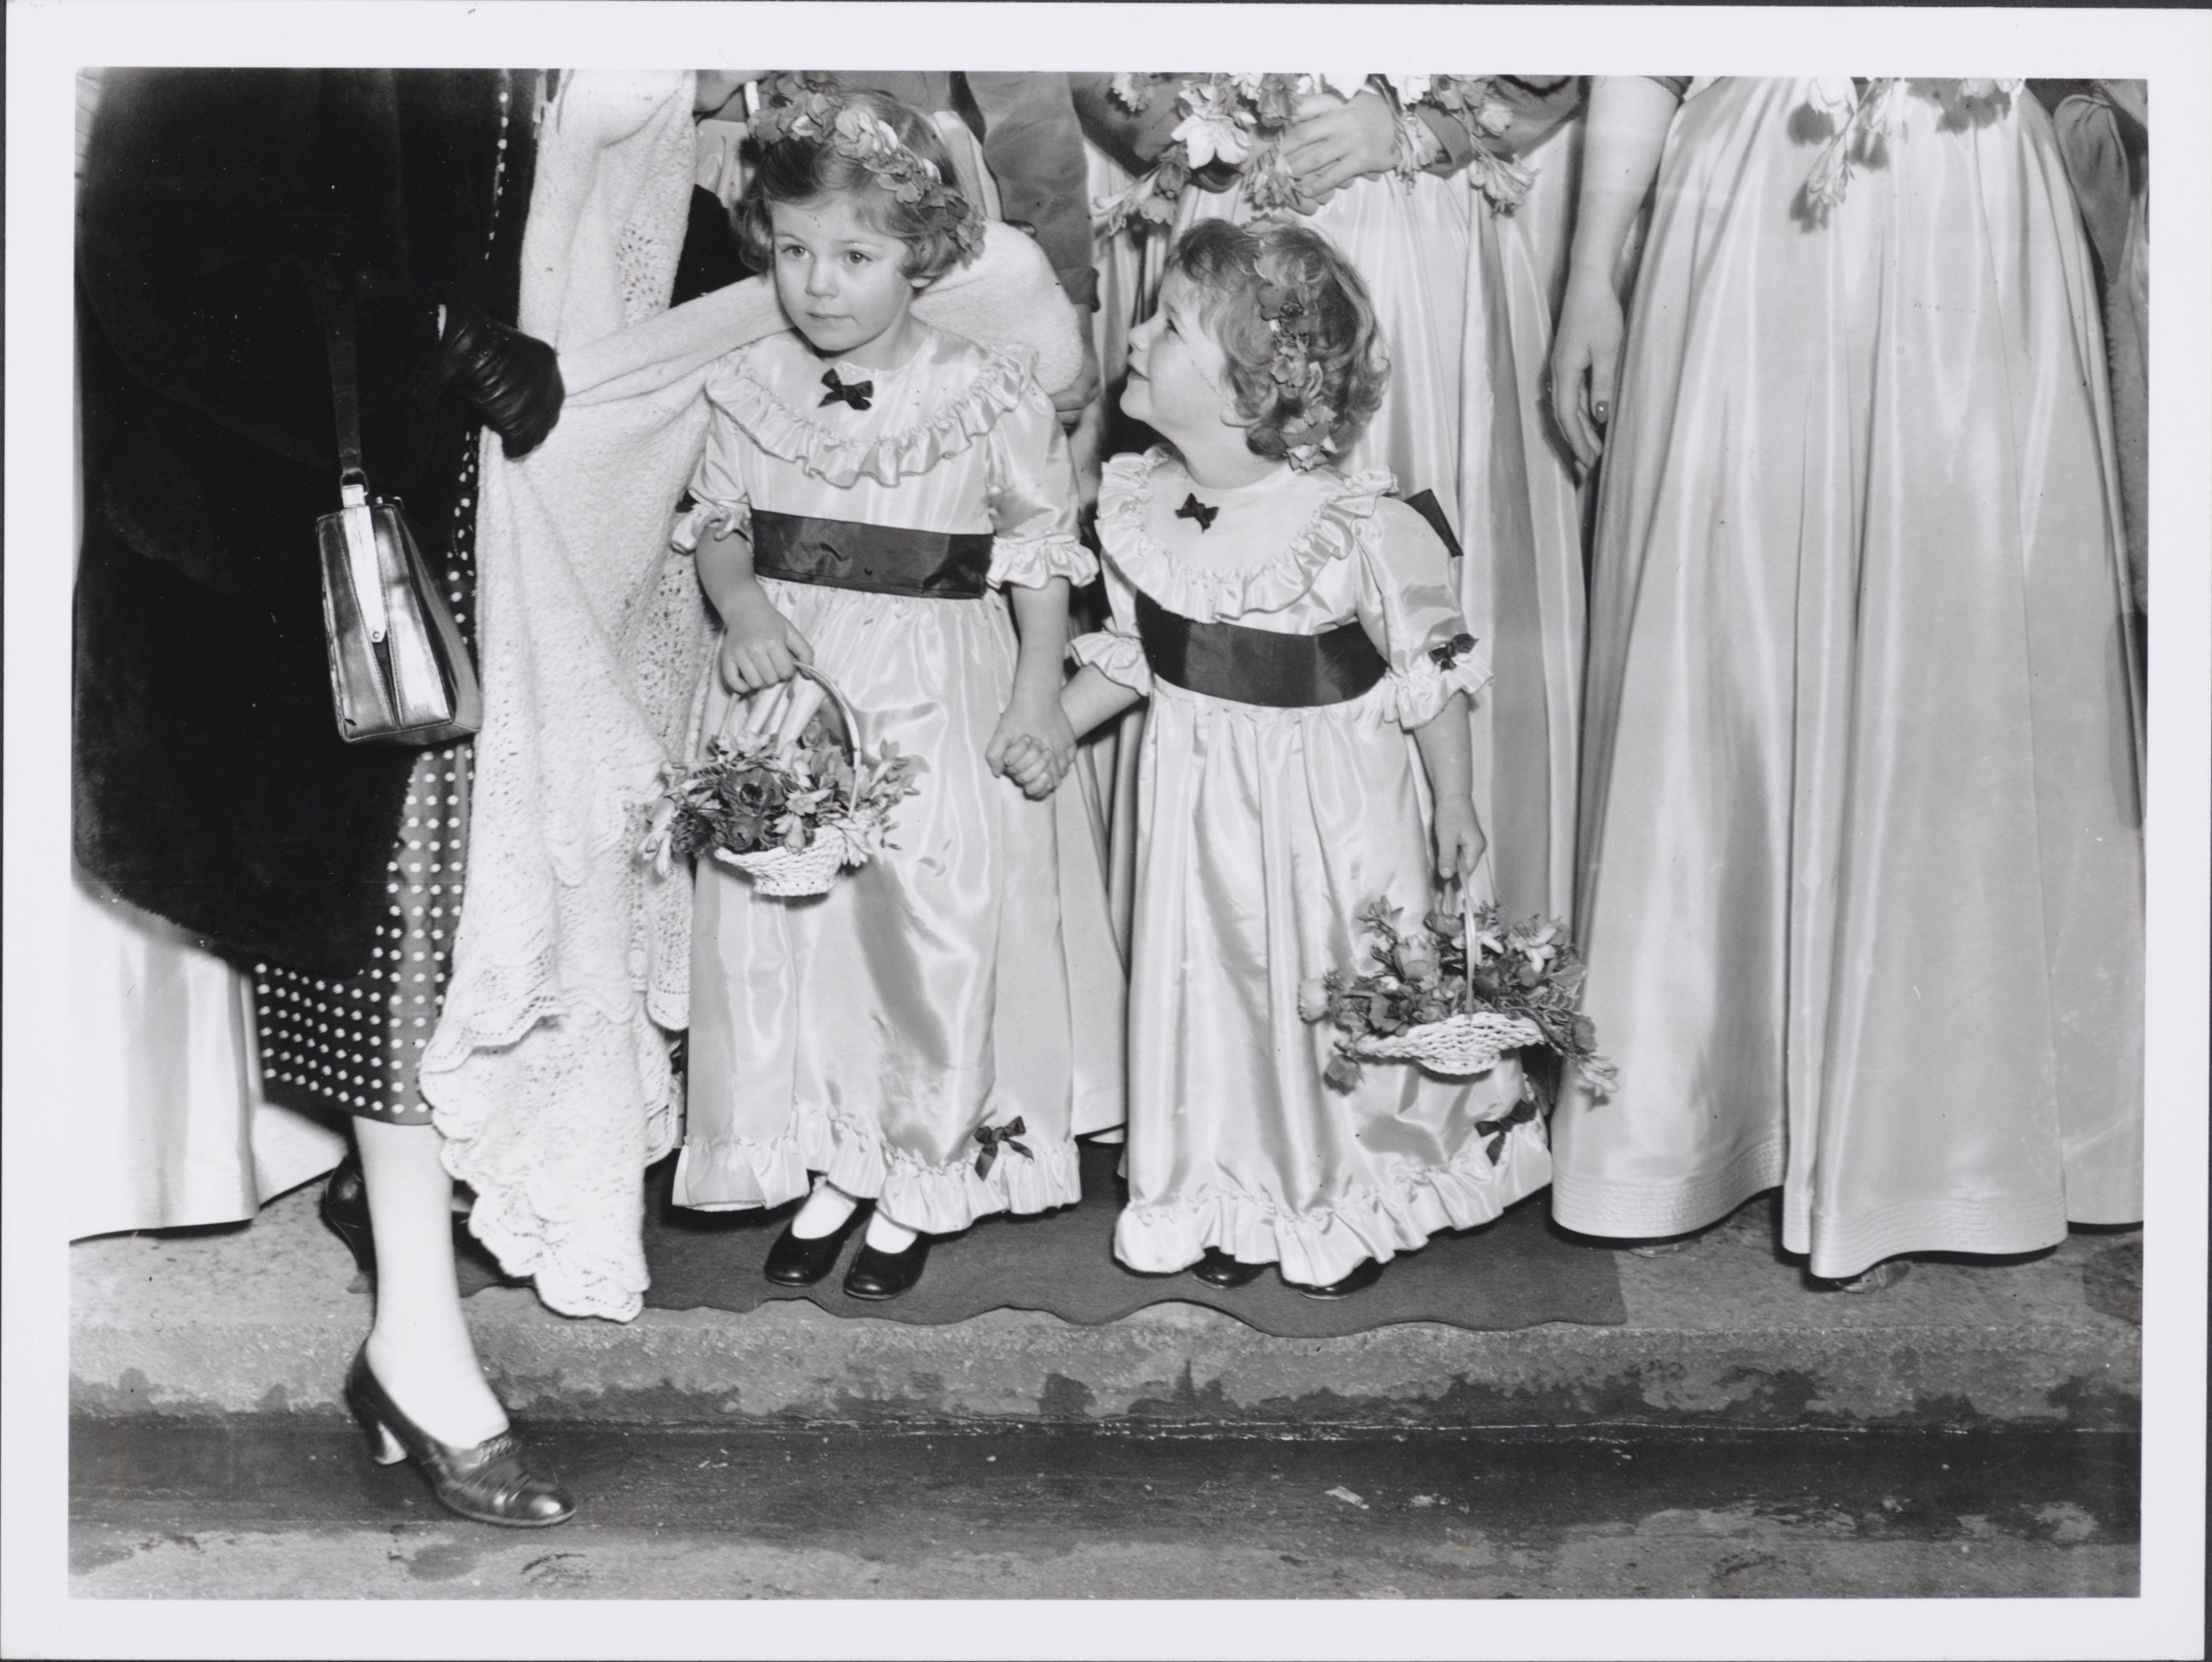 Camilla, aged four, and her sister Annabelle, aged three, as bridesmaids for the wedding of Jeremy Gubbitt and Diana du Cane in 1952